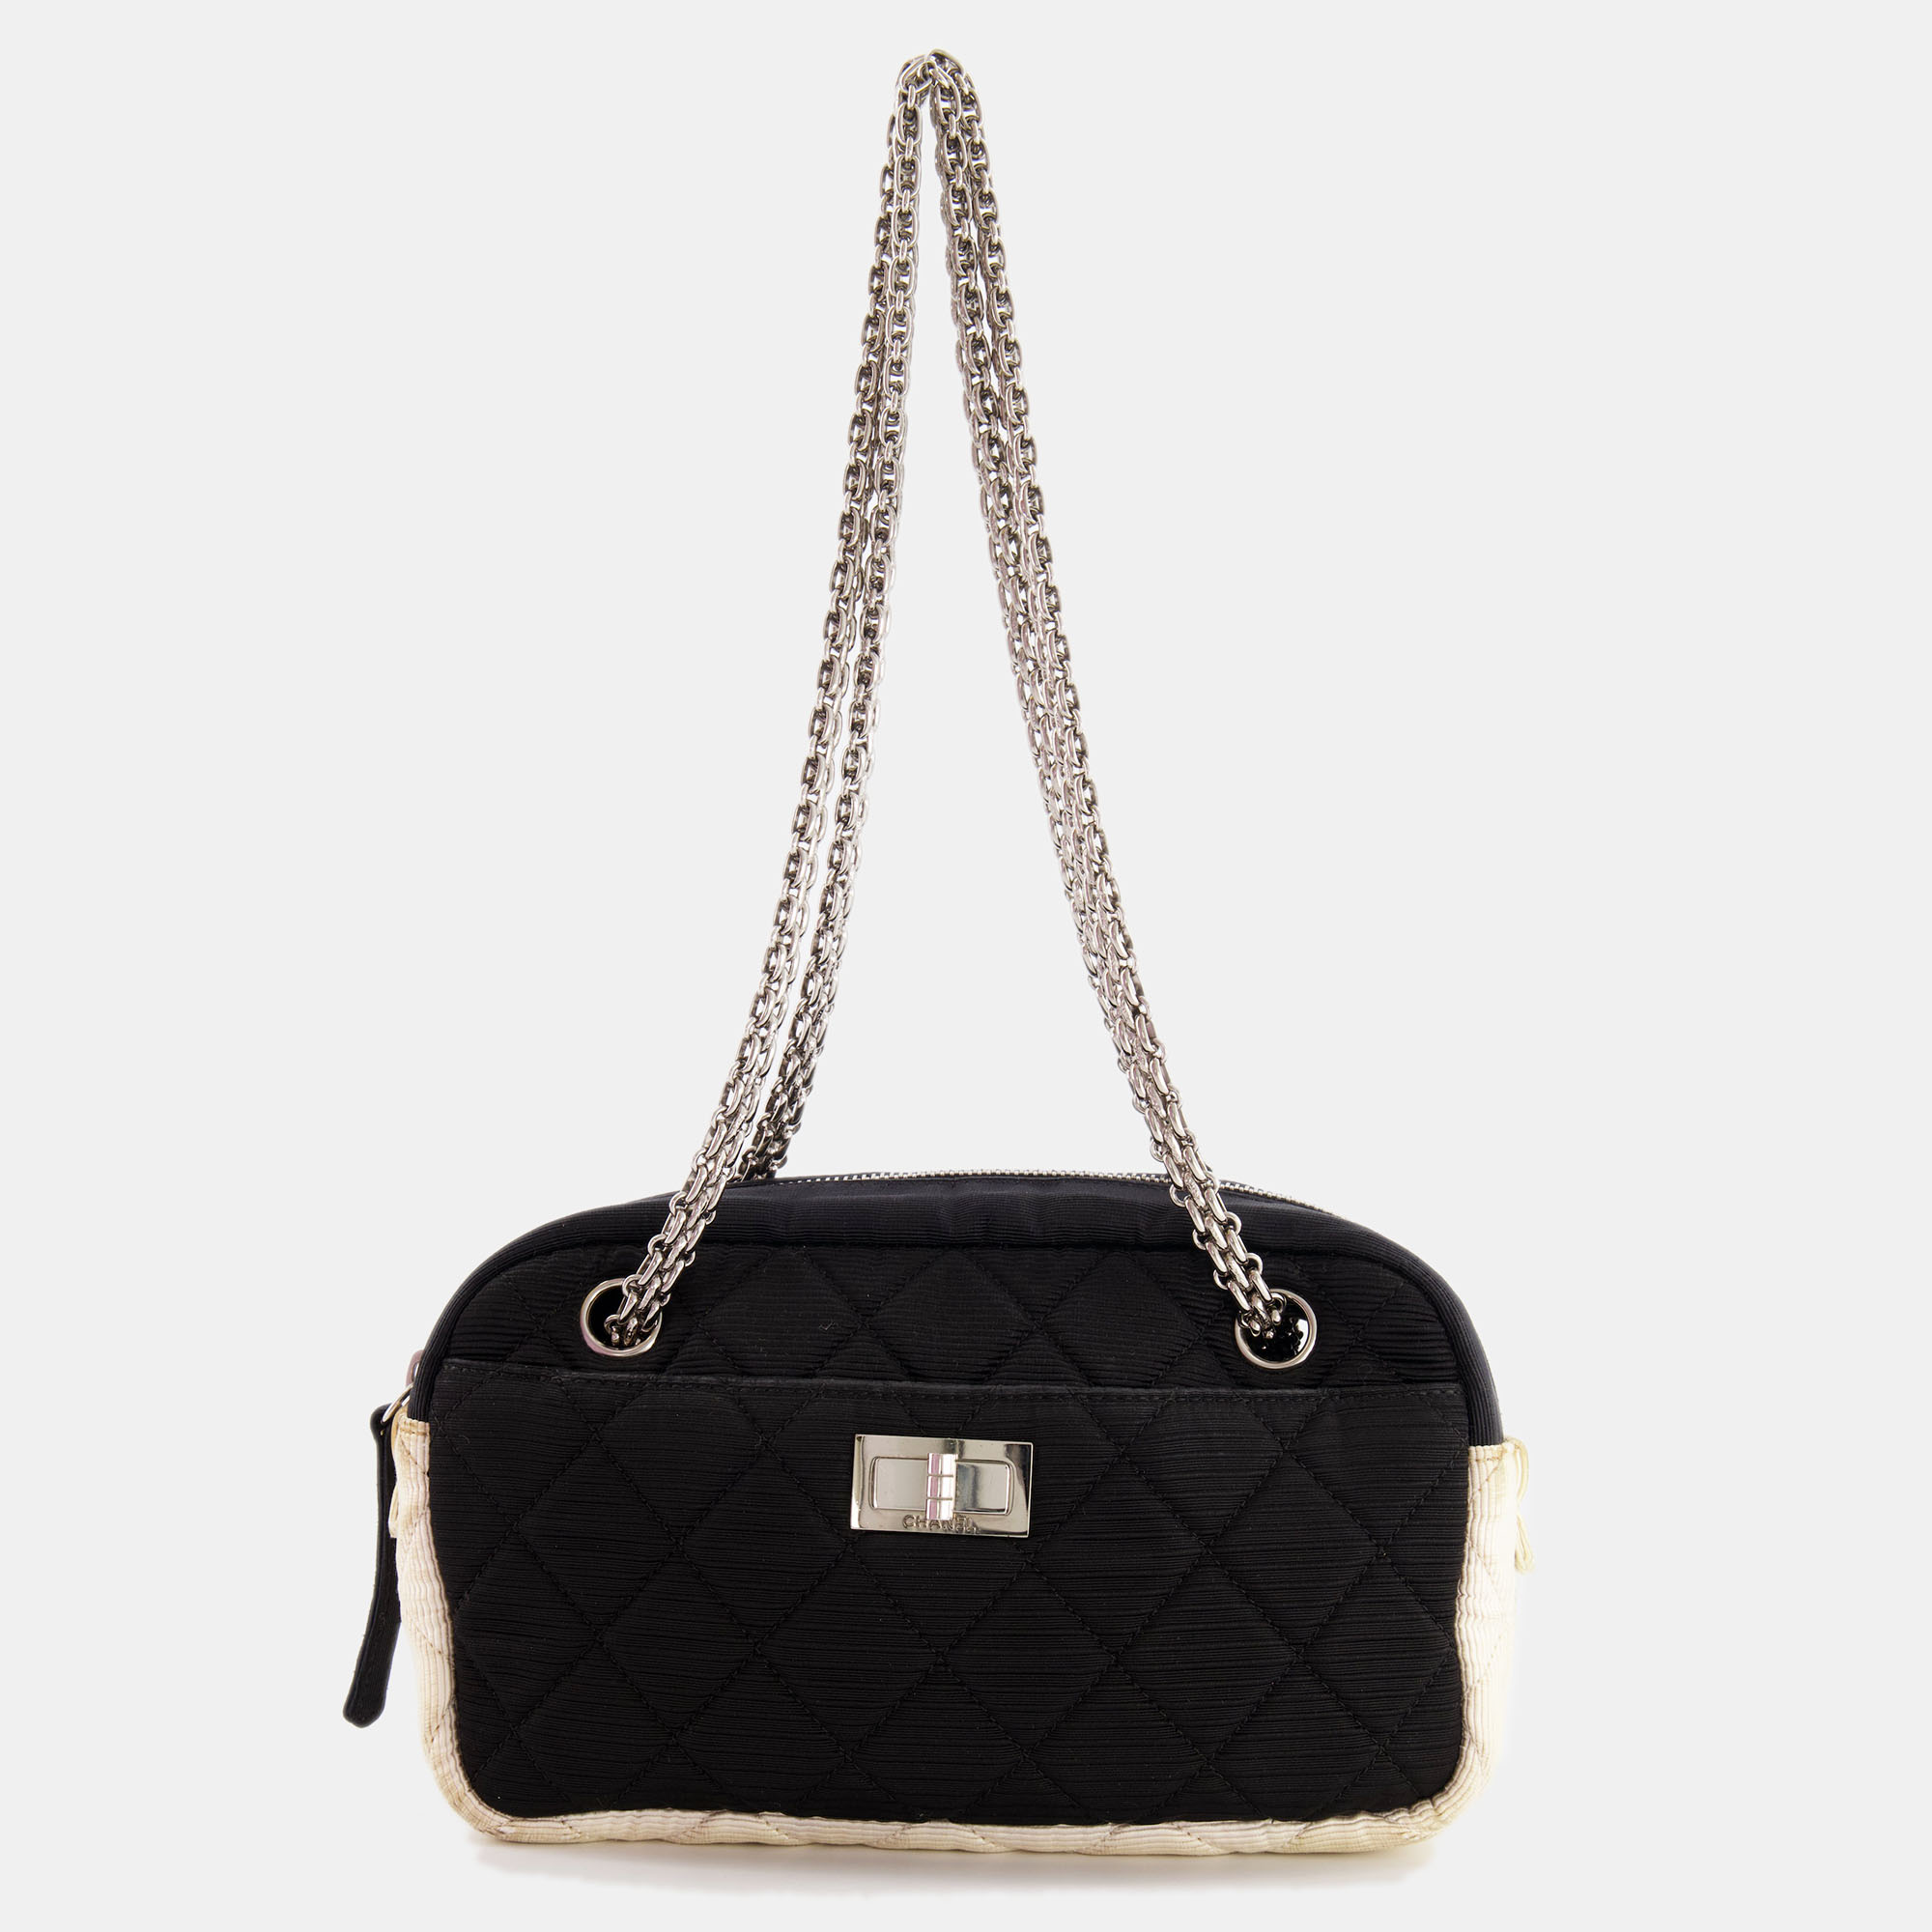 Chanel black and white canvas camera bag with silver hardware